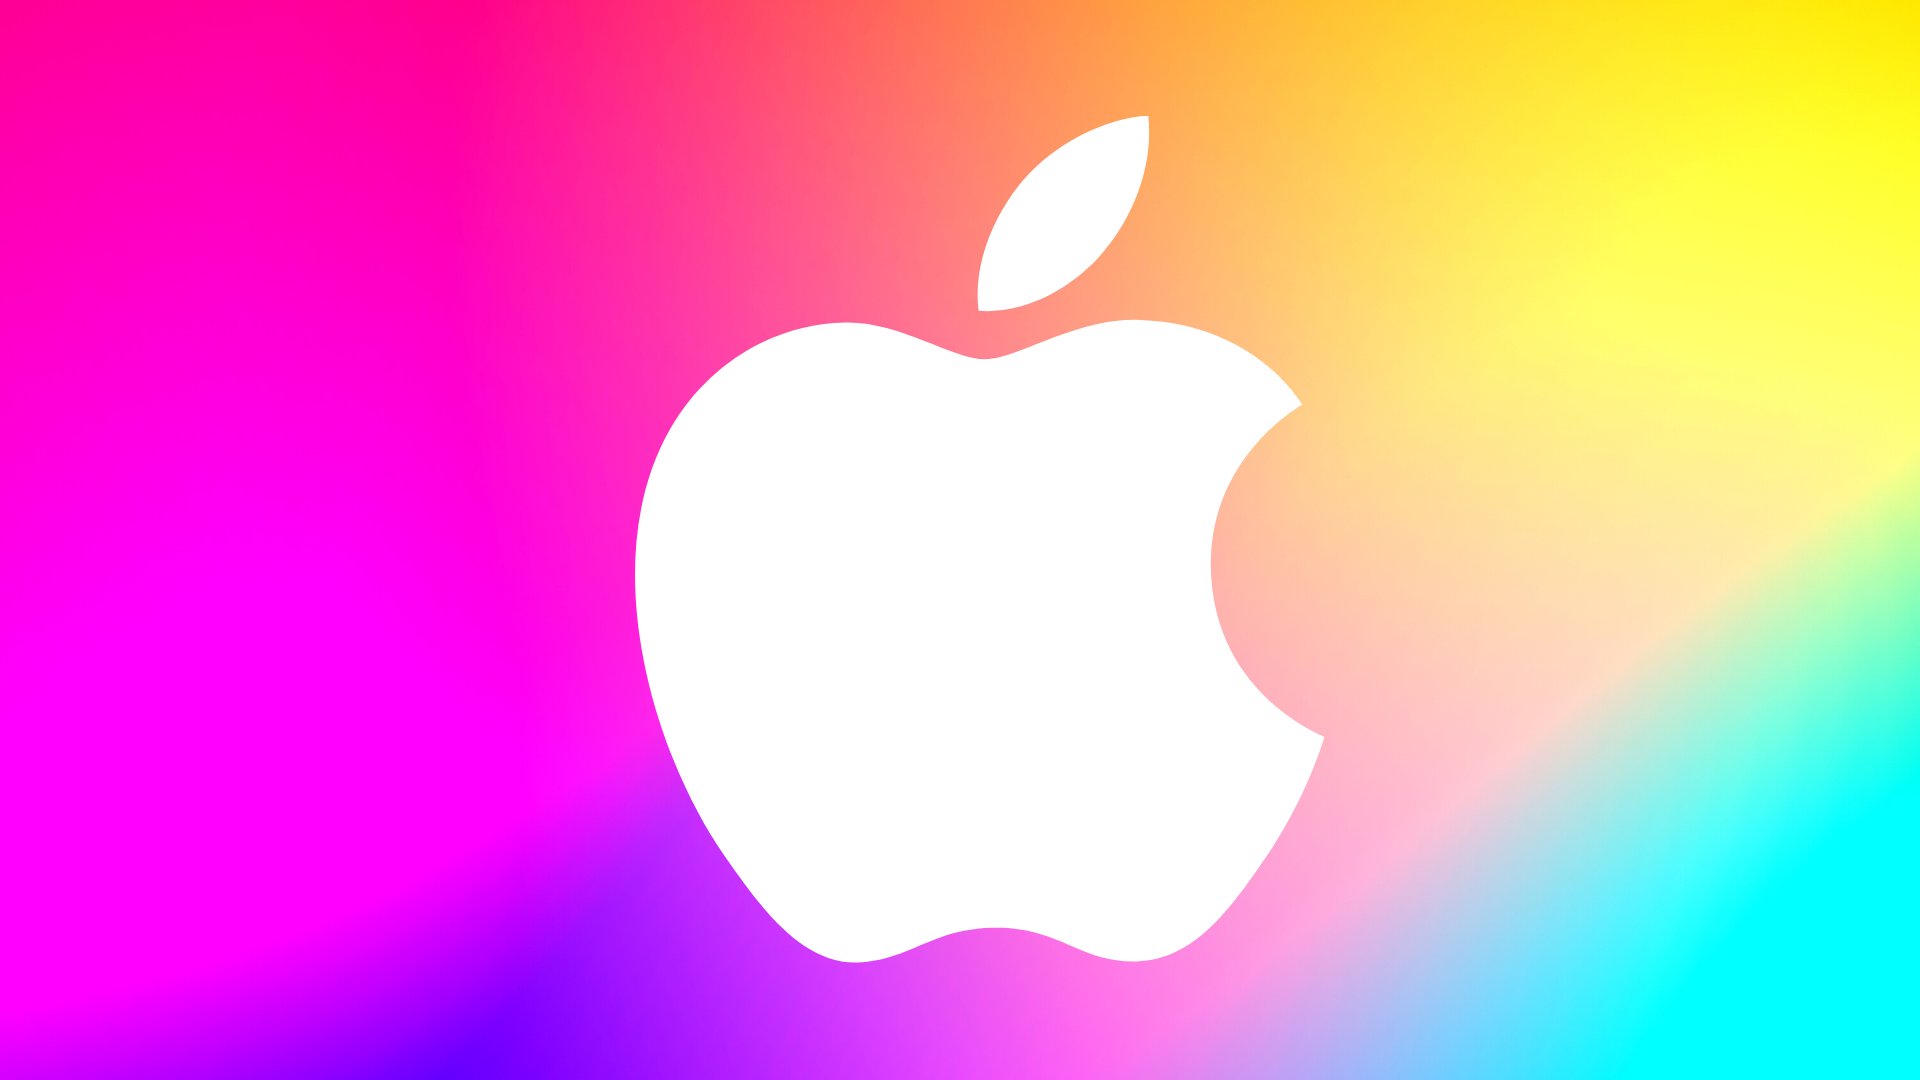 Blockworks IN: Goldman Sachs expects Apple to launch its Metaverse product in early 2023